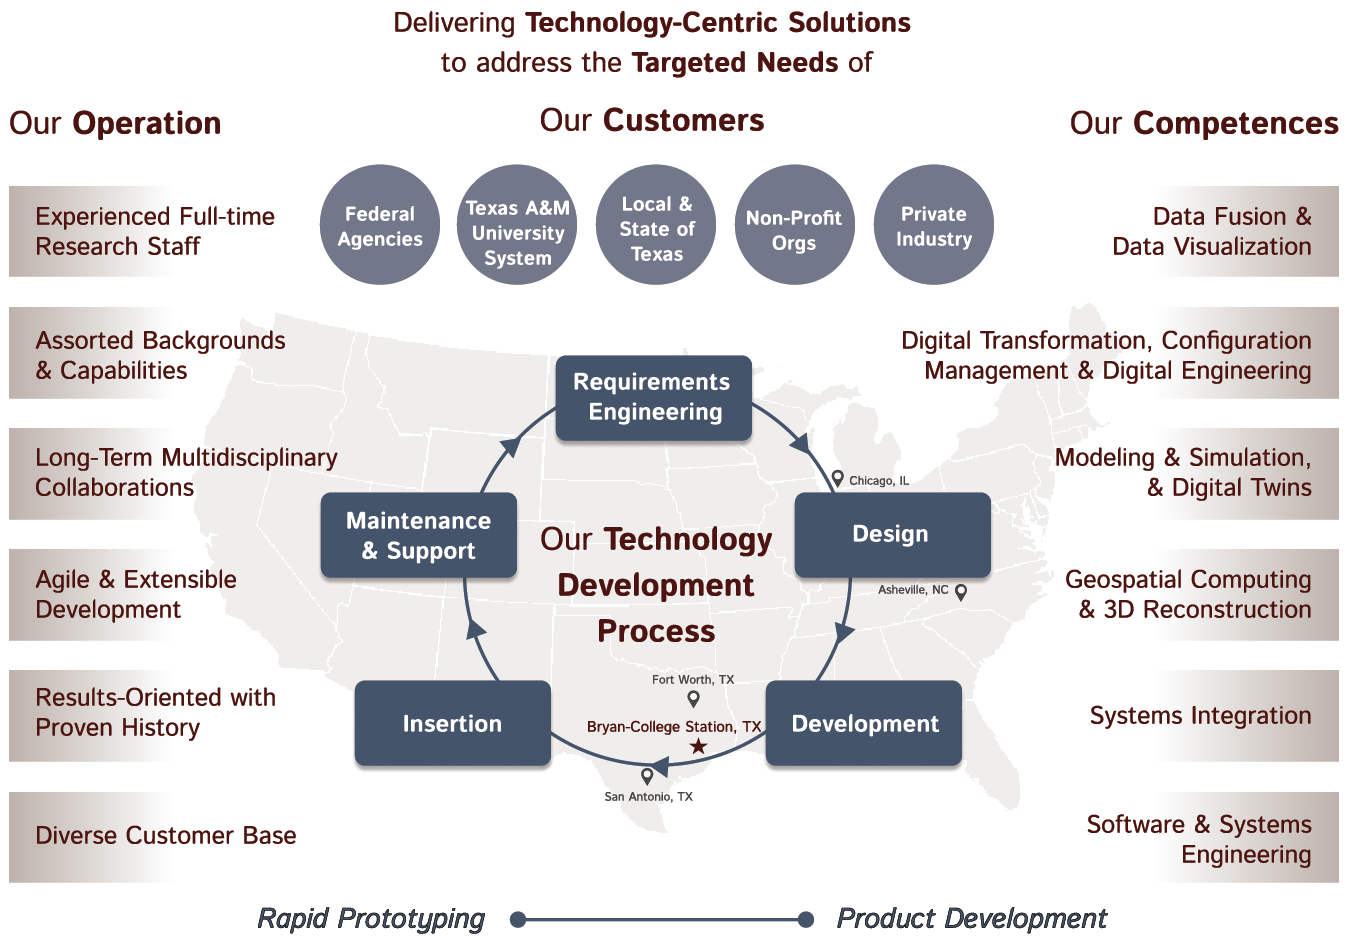 This is a diagram about delivering Technology-Centric Solutions to address the Targeted Needs of our Operation, our Customers, our Competencies. TCAT has experienced full-time research staff with assorted backgrounds and capabilities, long-term multidisciplinary collaborations, agile and extensible development, results-oriented with proven history, and a diverse customer base. TCAT spans the continuum from rapid prototyping to product development.